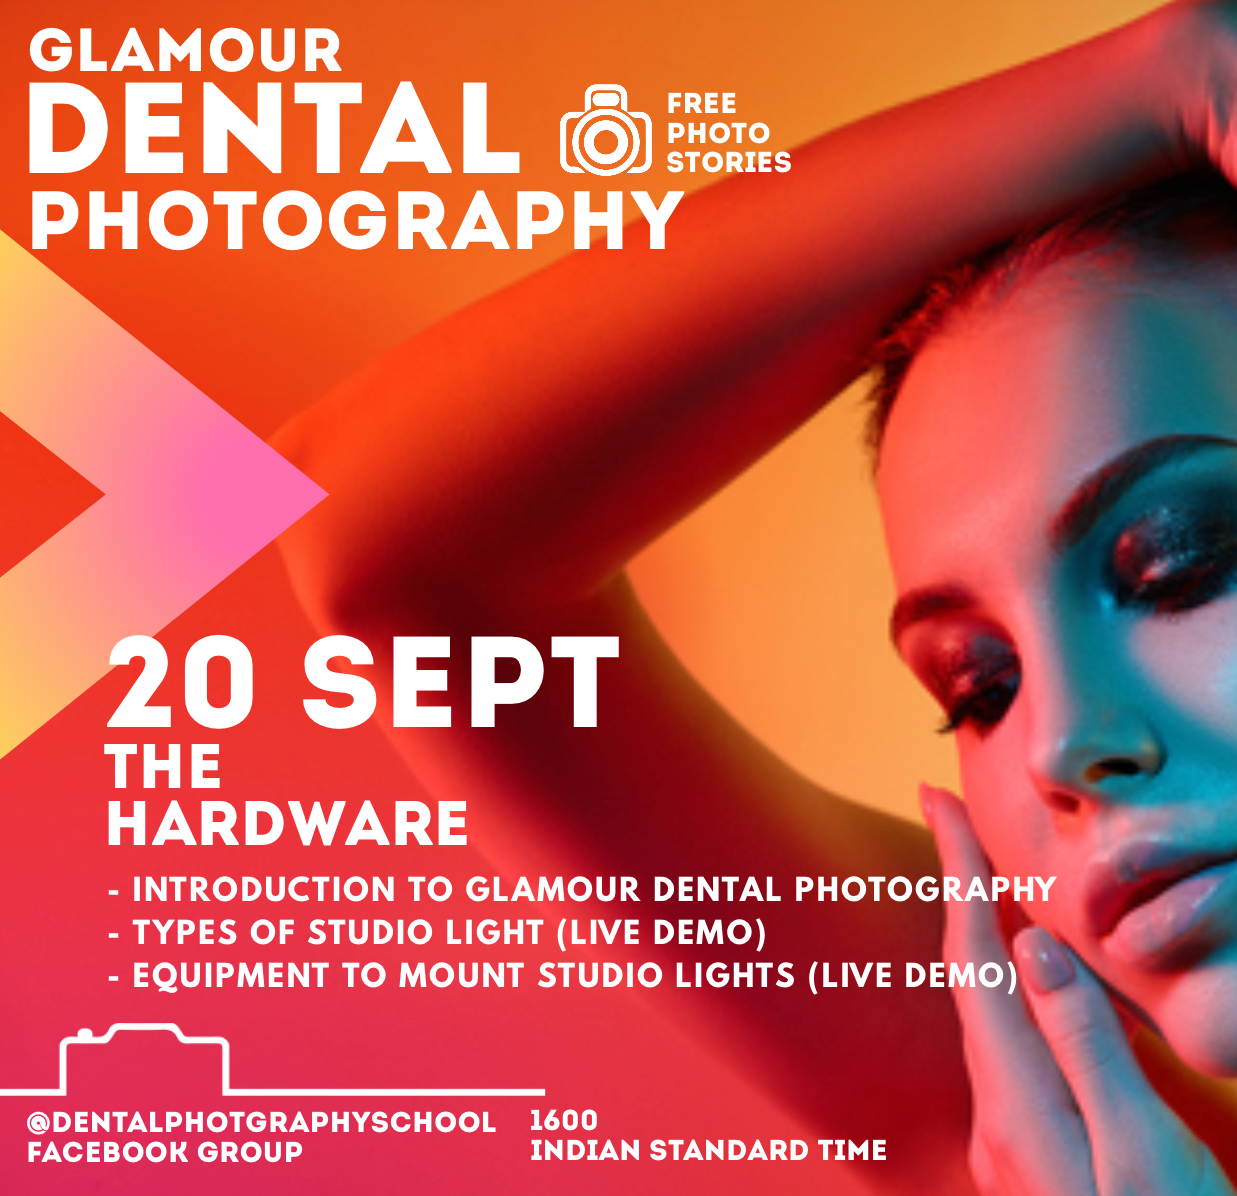 Schedule for glamour dental photography on September 20